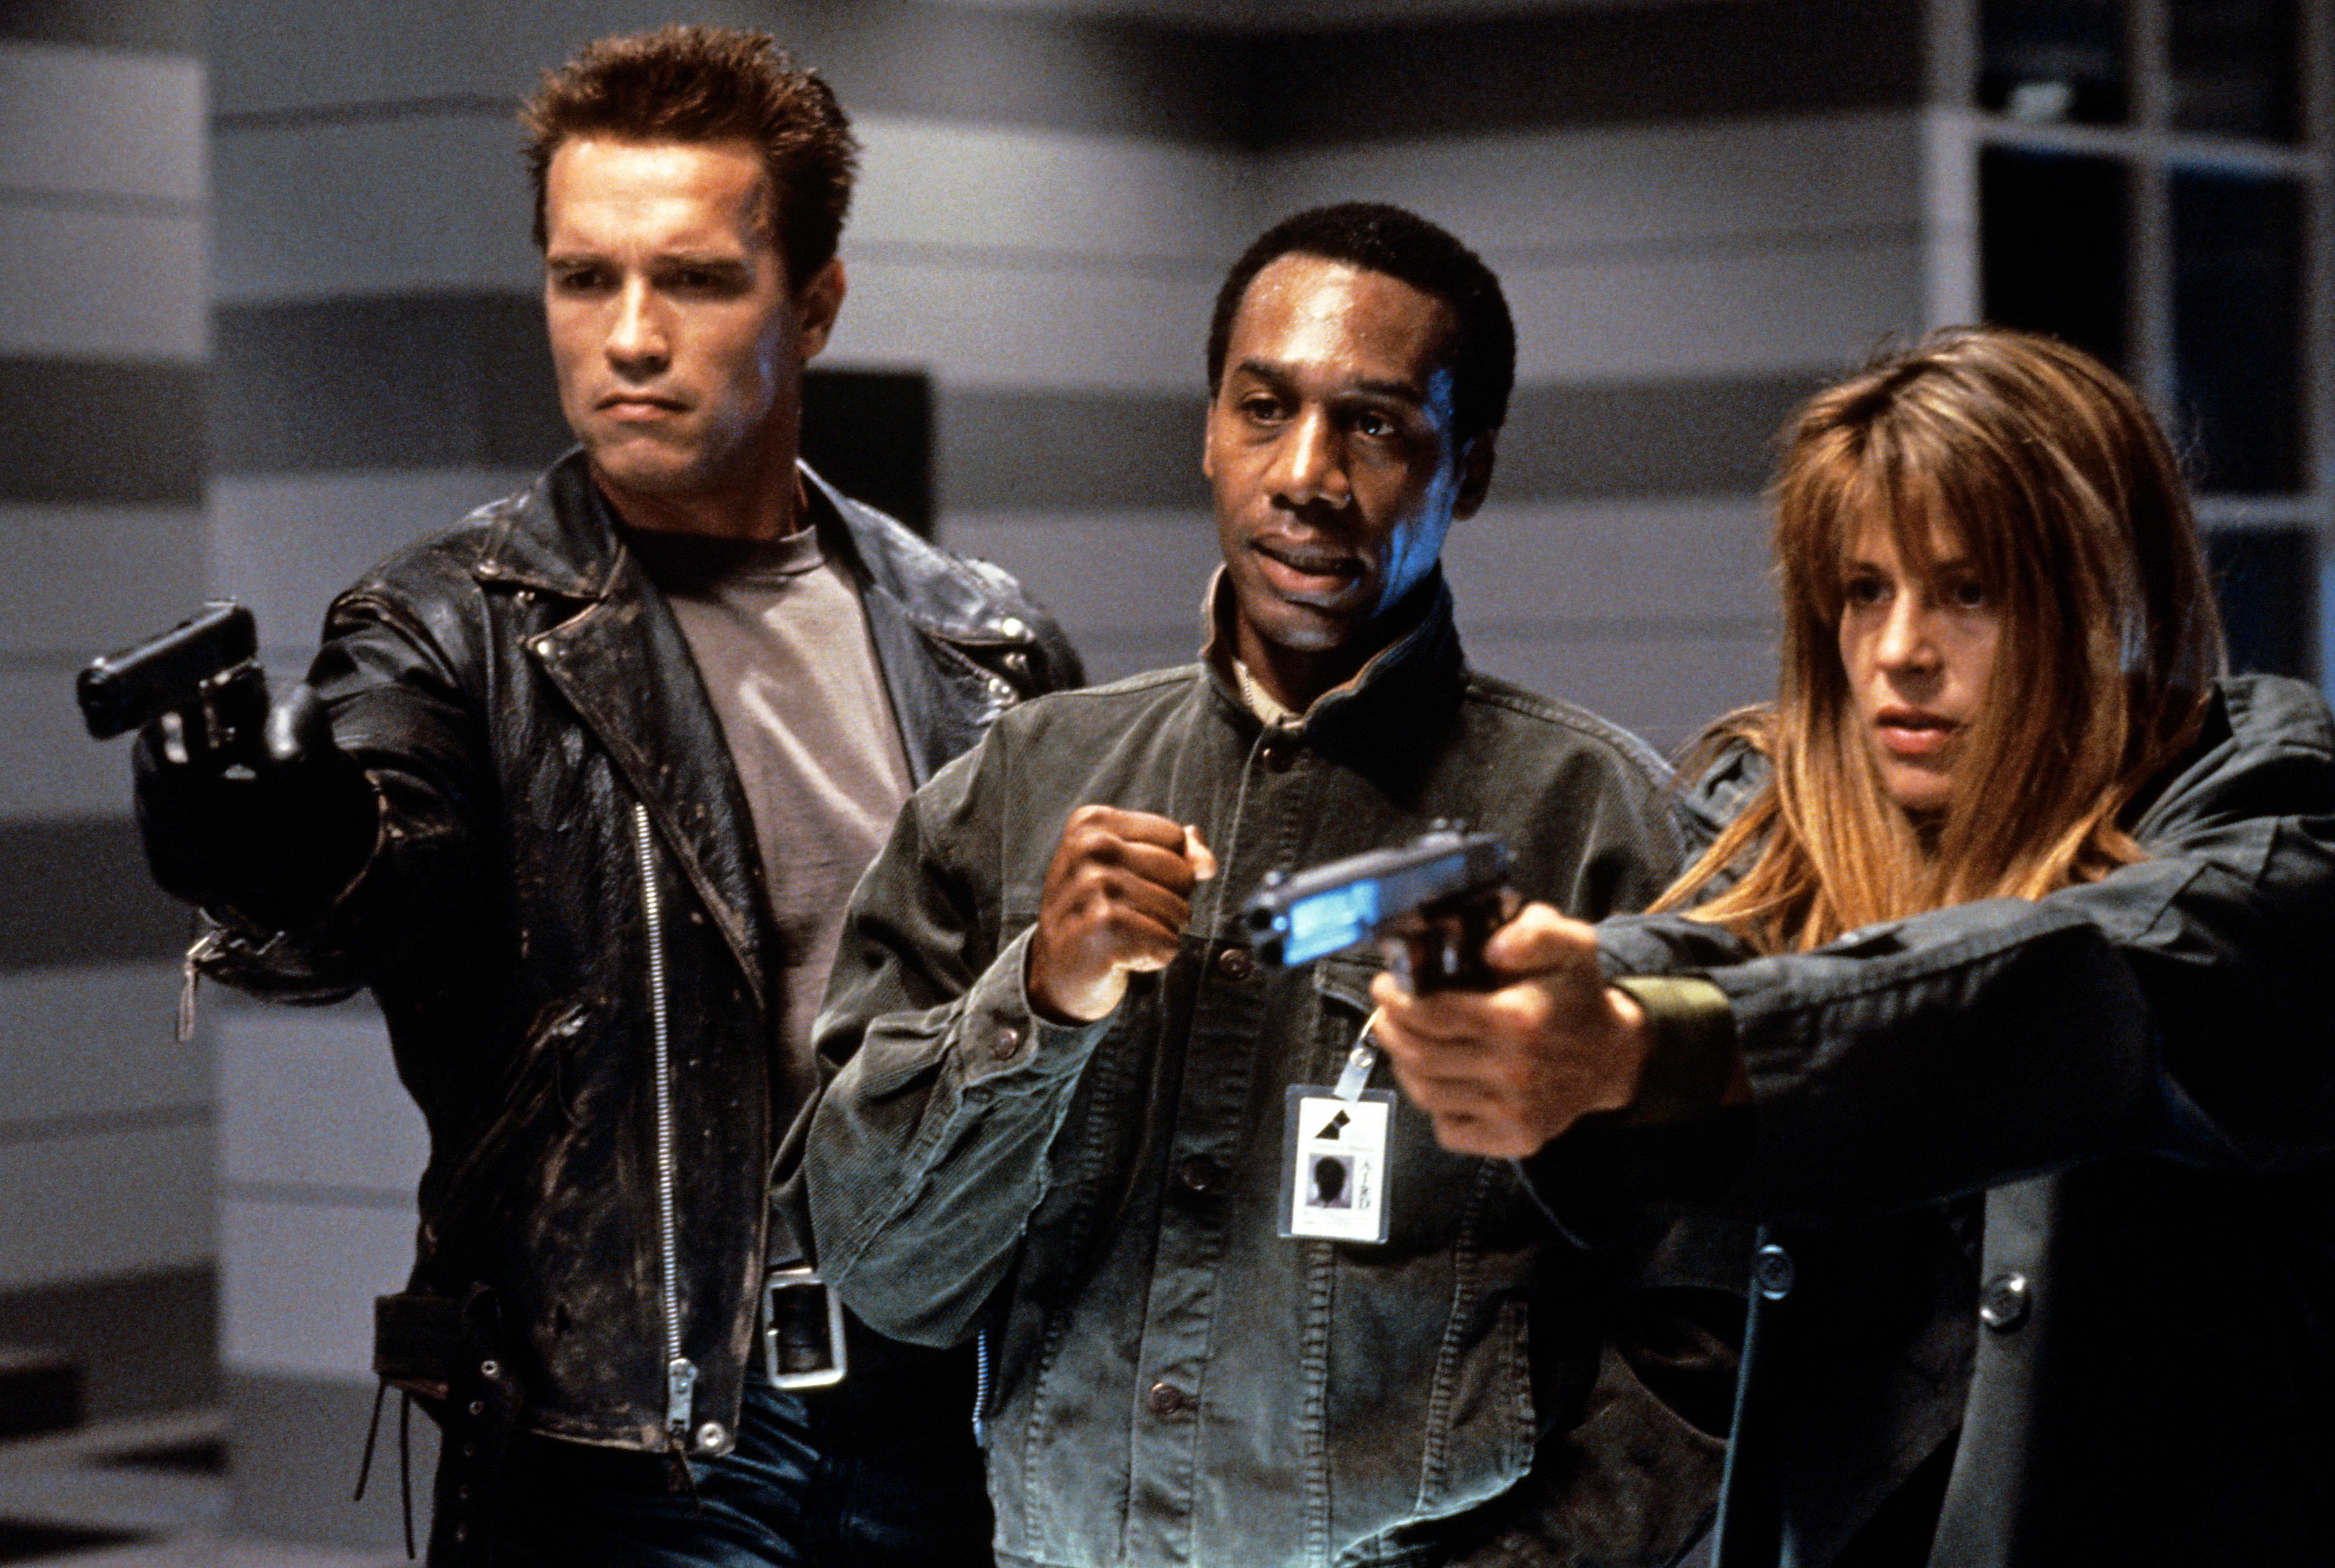 Arnold Schwarzenegger, Joe Morton, and Linda Hamilton engage in a stand-off with off-screen enemies